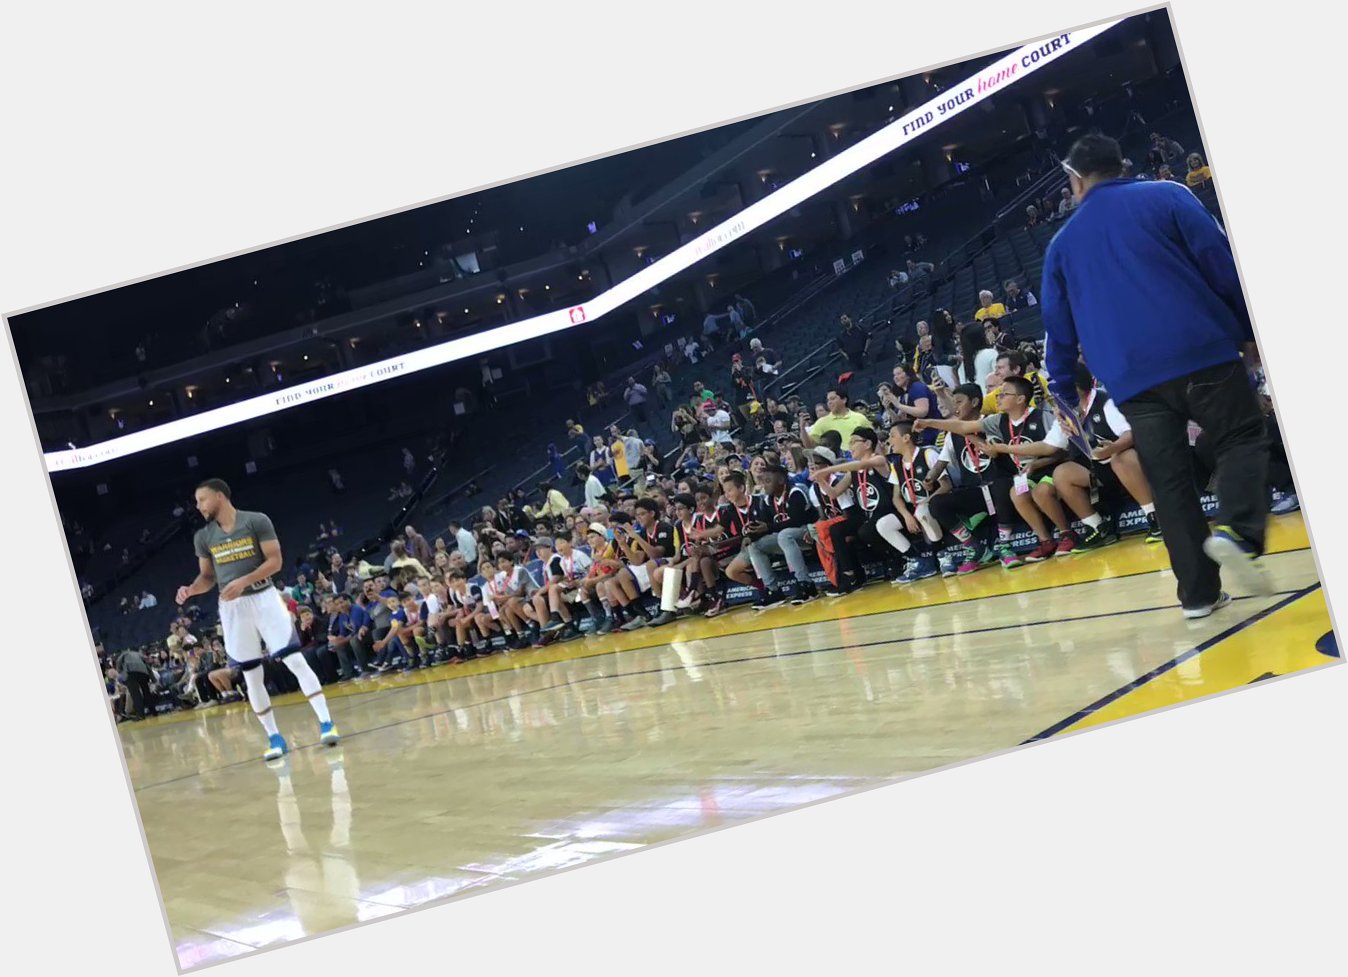 Kids sitting courtside sing Happy Birthday to Stephen Curry as the reigning 2-time MVP warms up!

